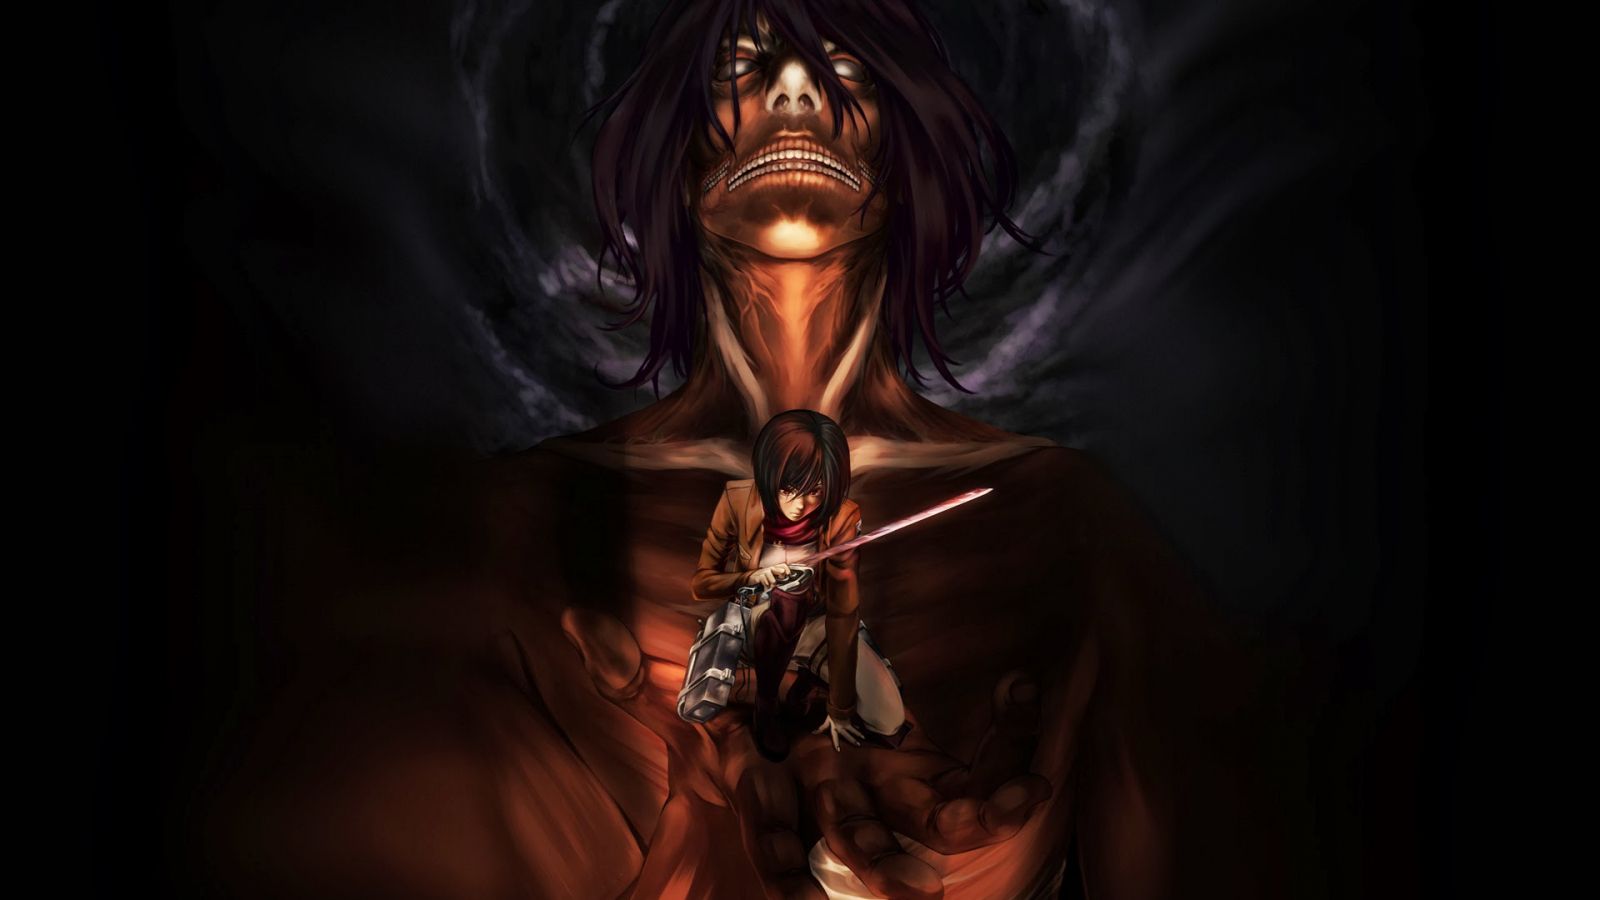 Free download Attack On Titan Wallpaper 1920x1080 Mikasa Eren yeager jaeger rogue [1920x1200] for your Desktop, Mobile & Tablet. Explore Attack on Titan Wallpaper 1920x1080. Cool Attack on Titan